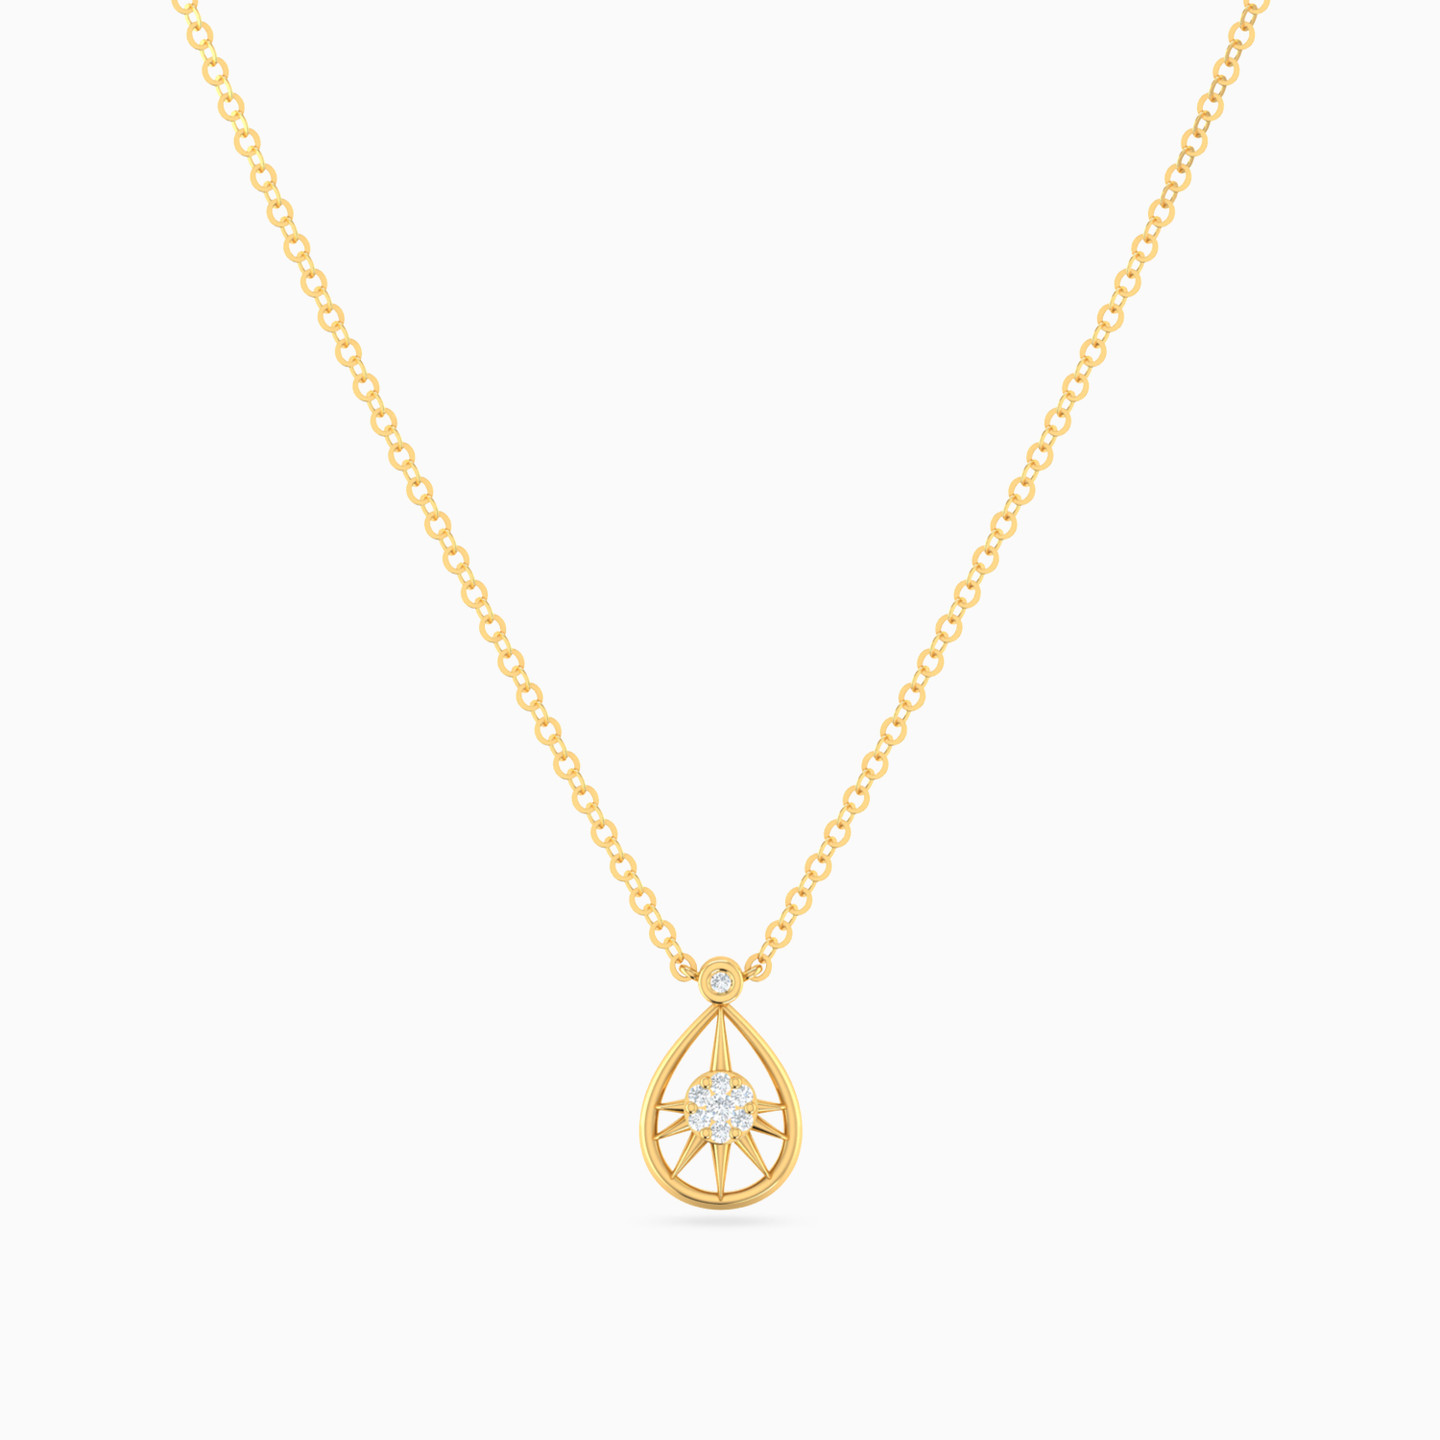 Pear Shaped Diamond Pendant Necklace with 18K Gold Chain - 3